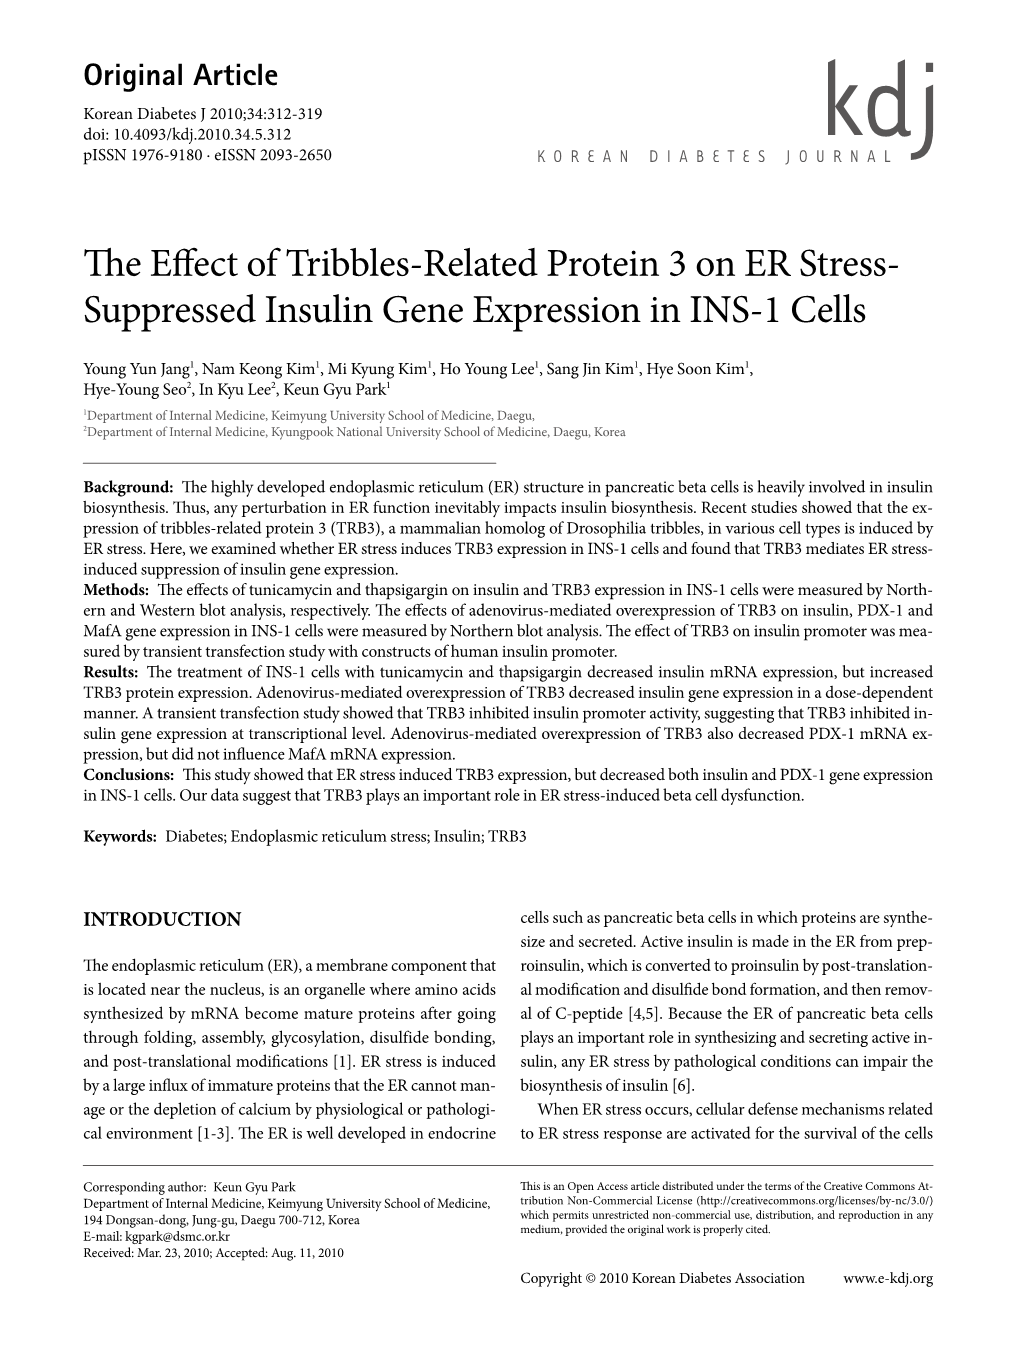 Suppressed Insulin Gene Expression in INS-1 Cells